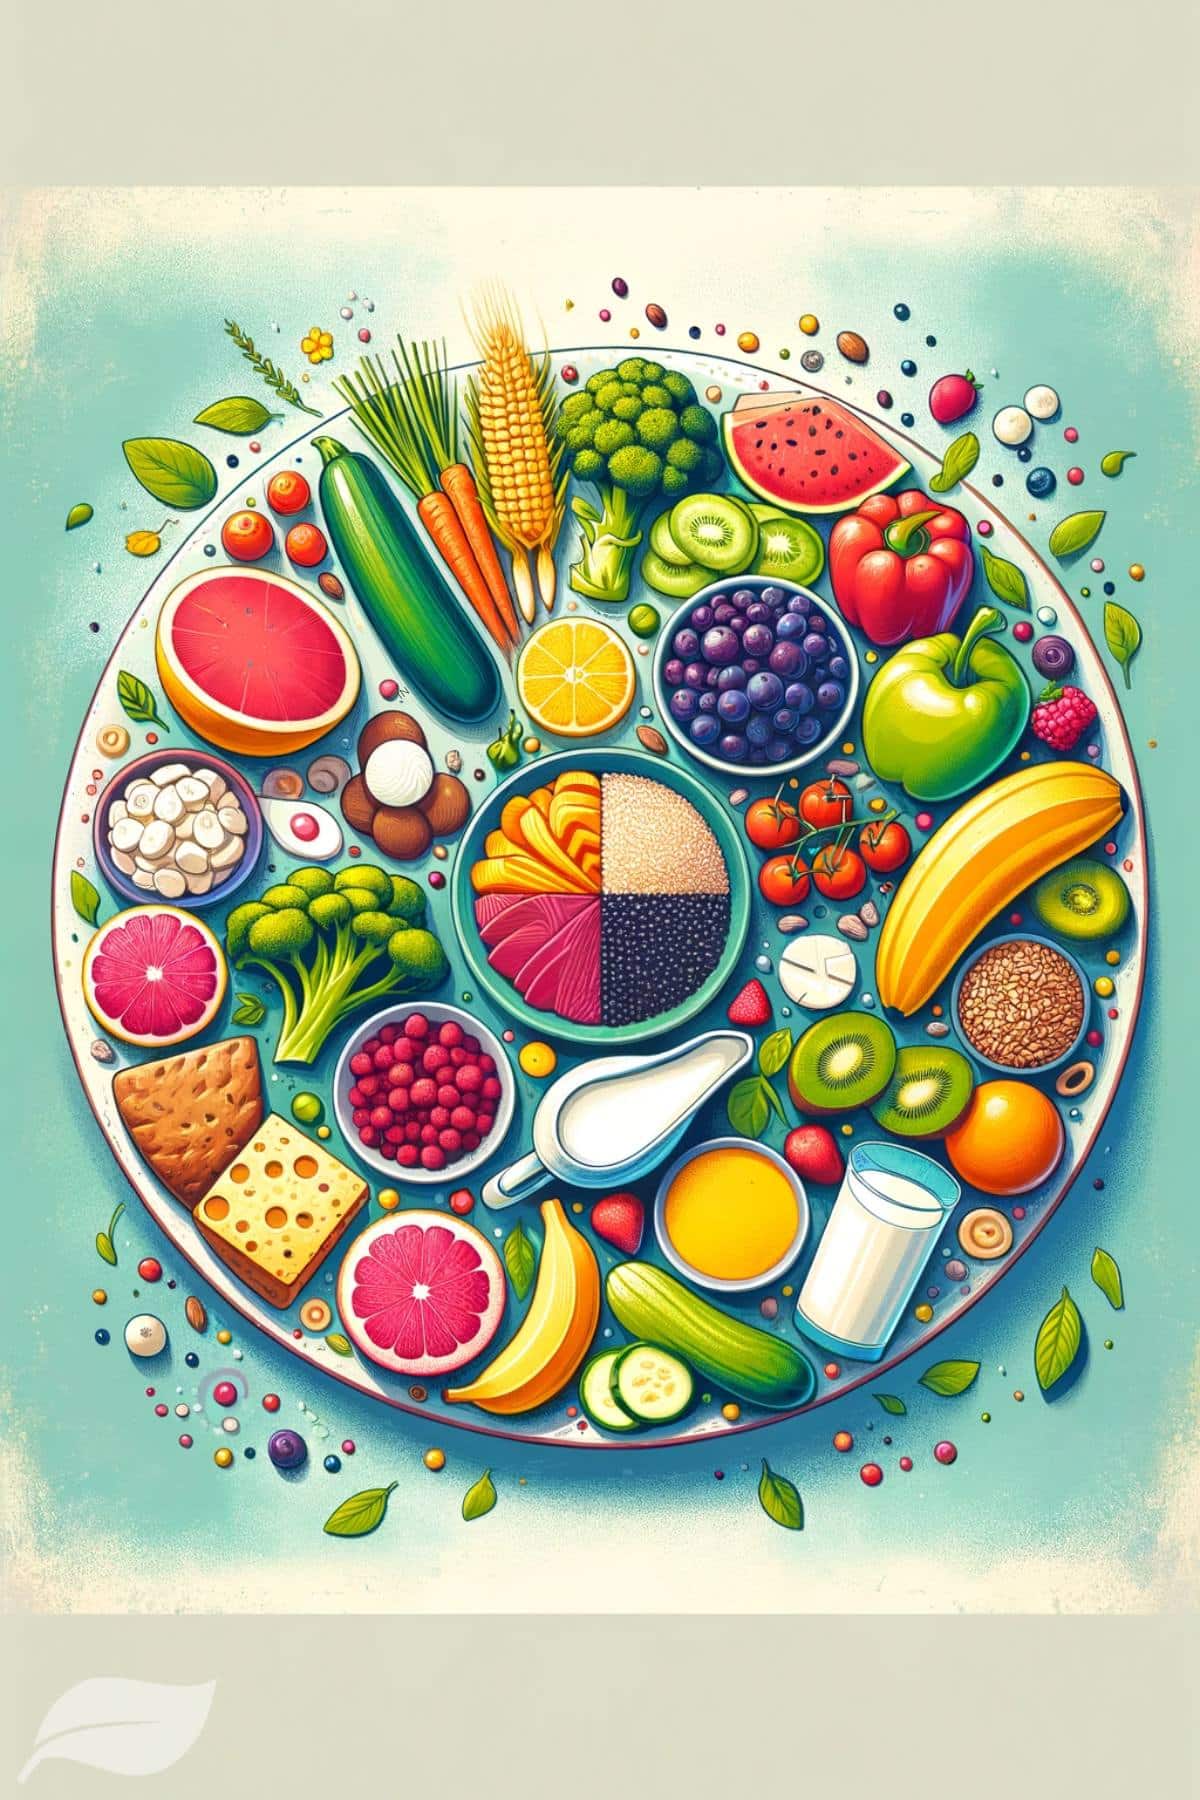 A visually appealing featured image illustrating the concept of a balanced diet